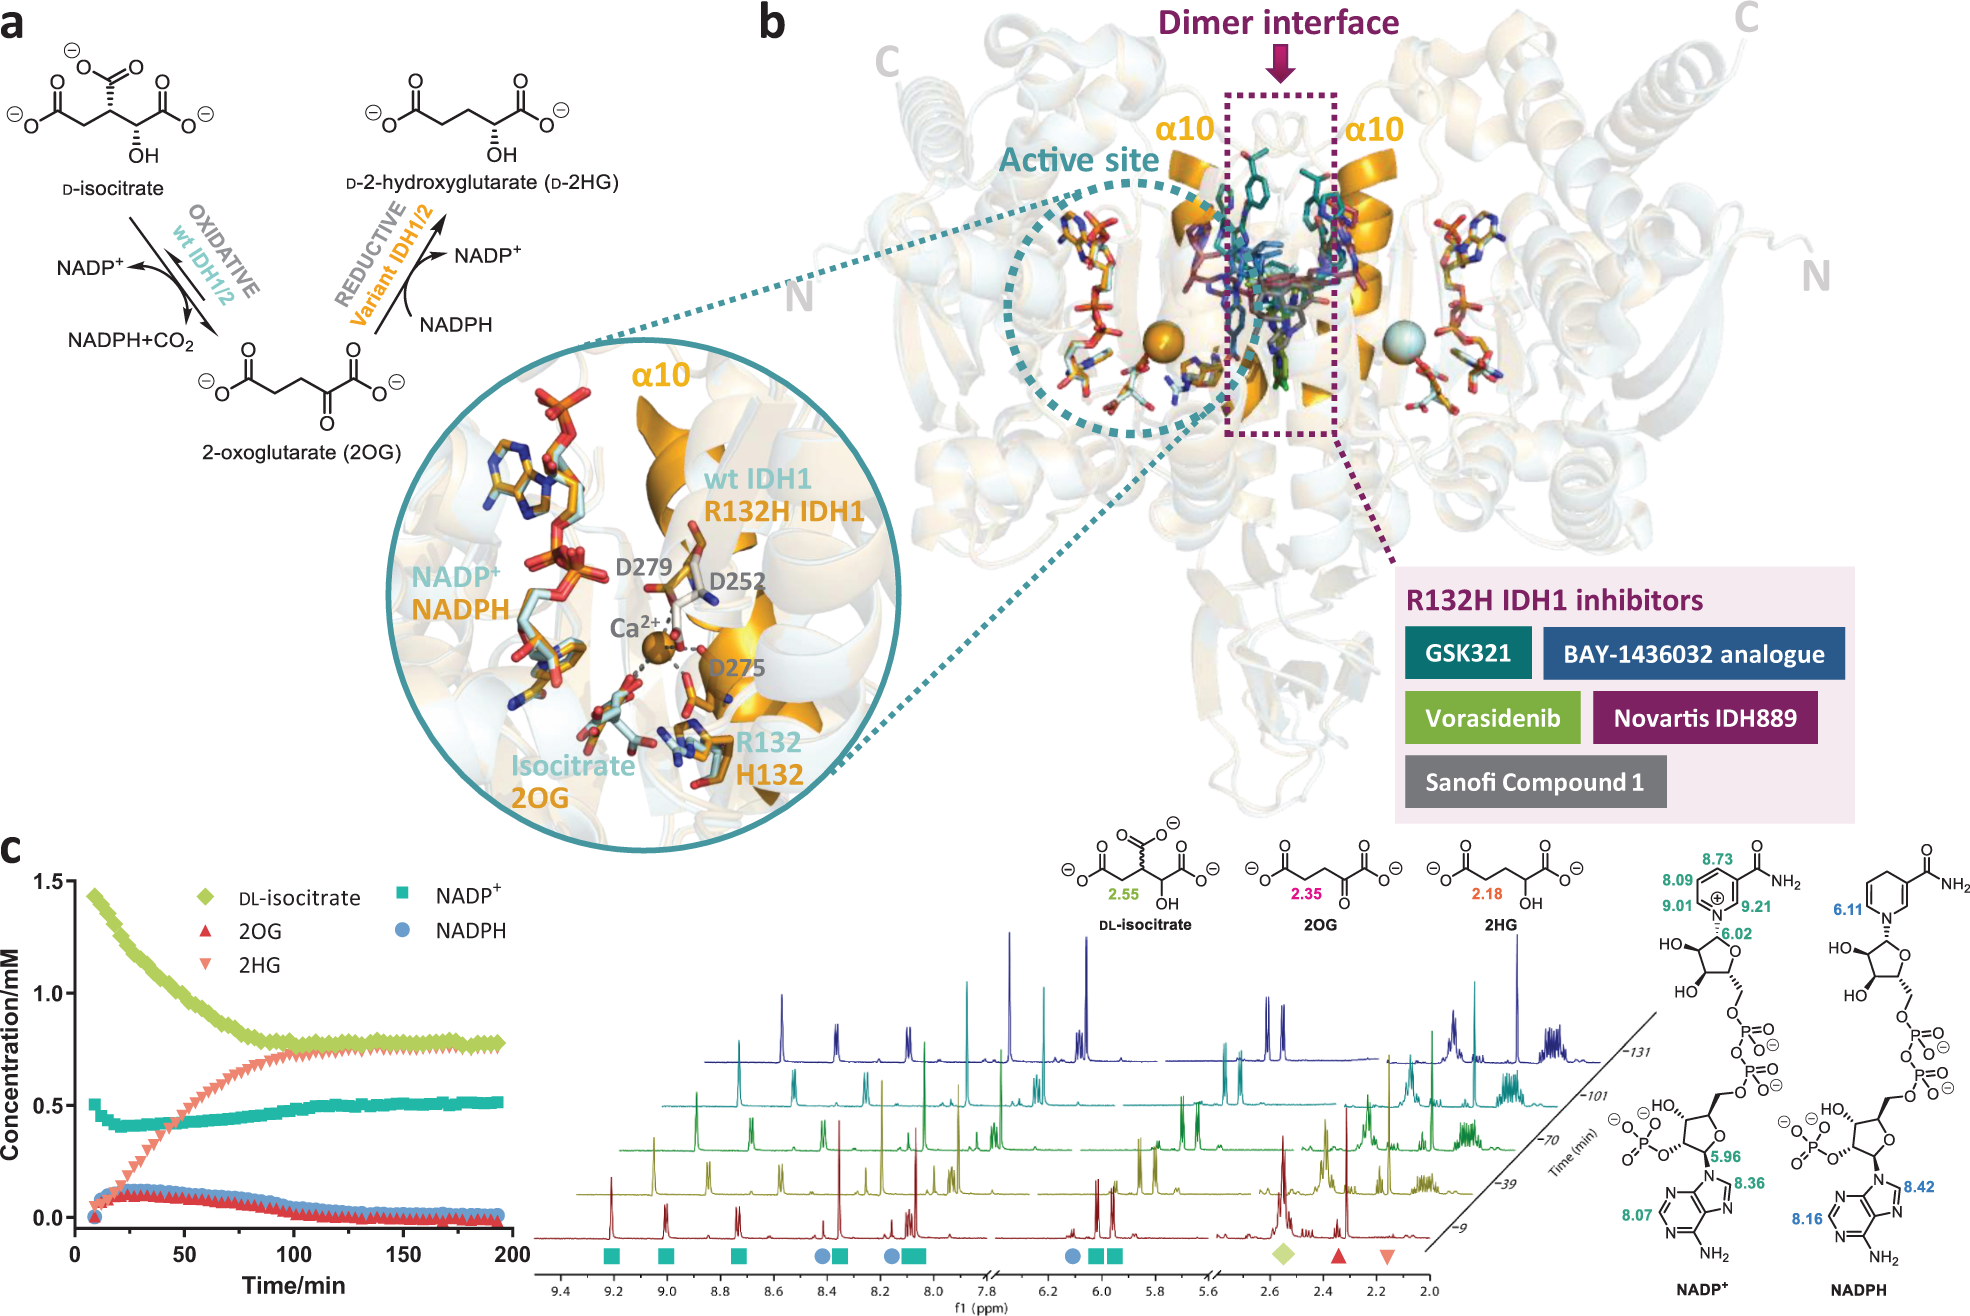 Roles of metal ions in the selective inhibition of oncogenic